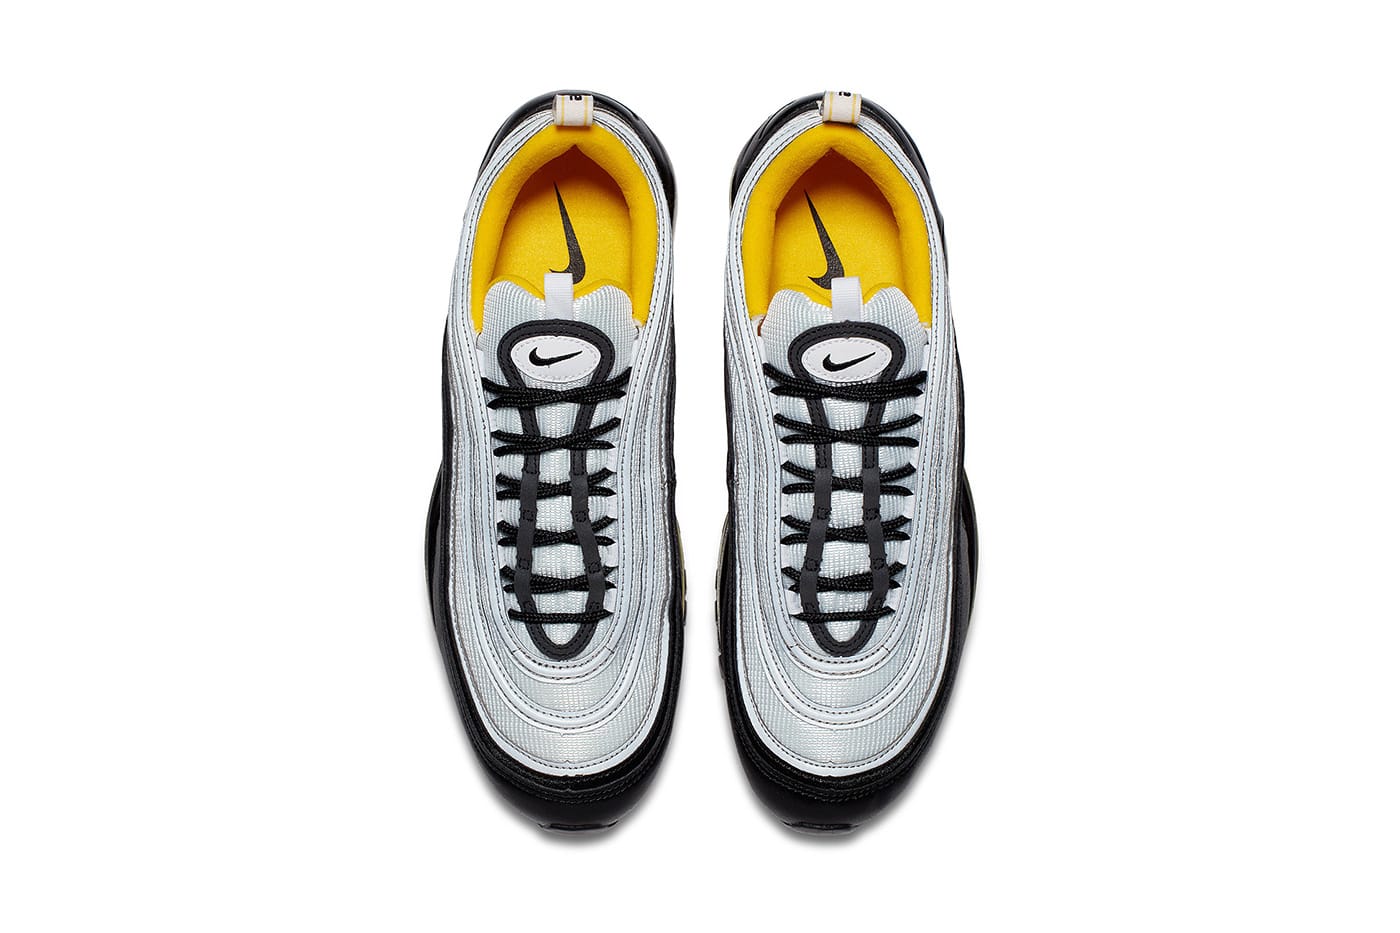 Nike Air Max 97 in Black, White, Yellow 